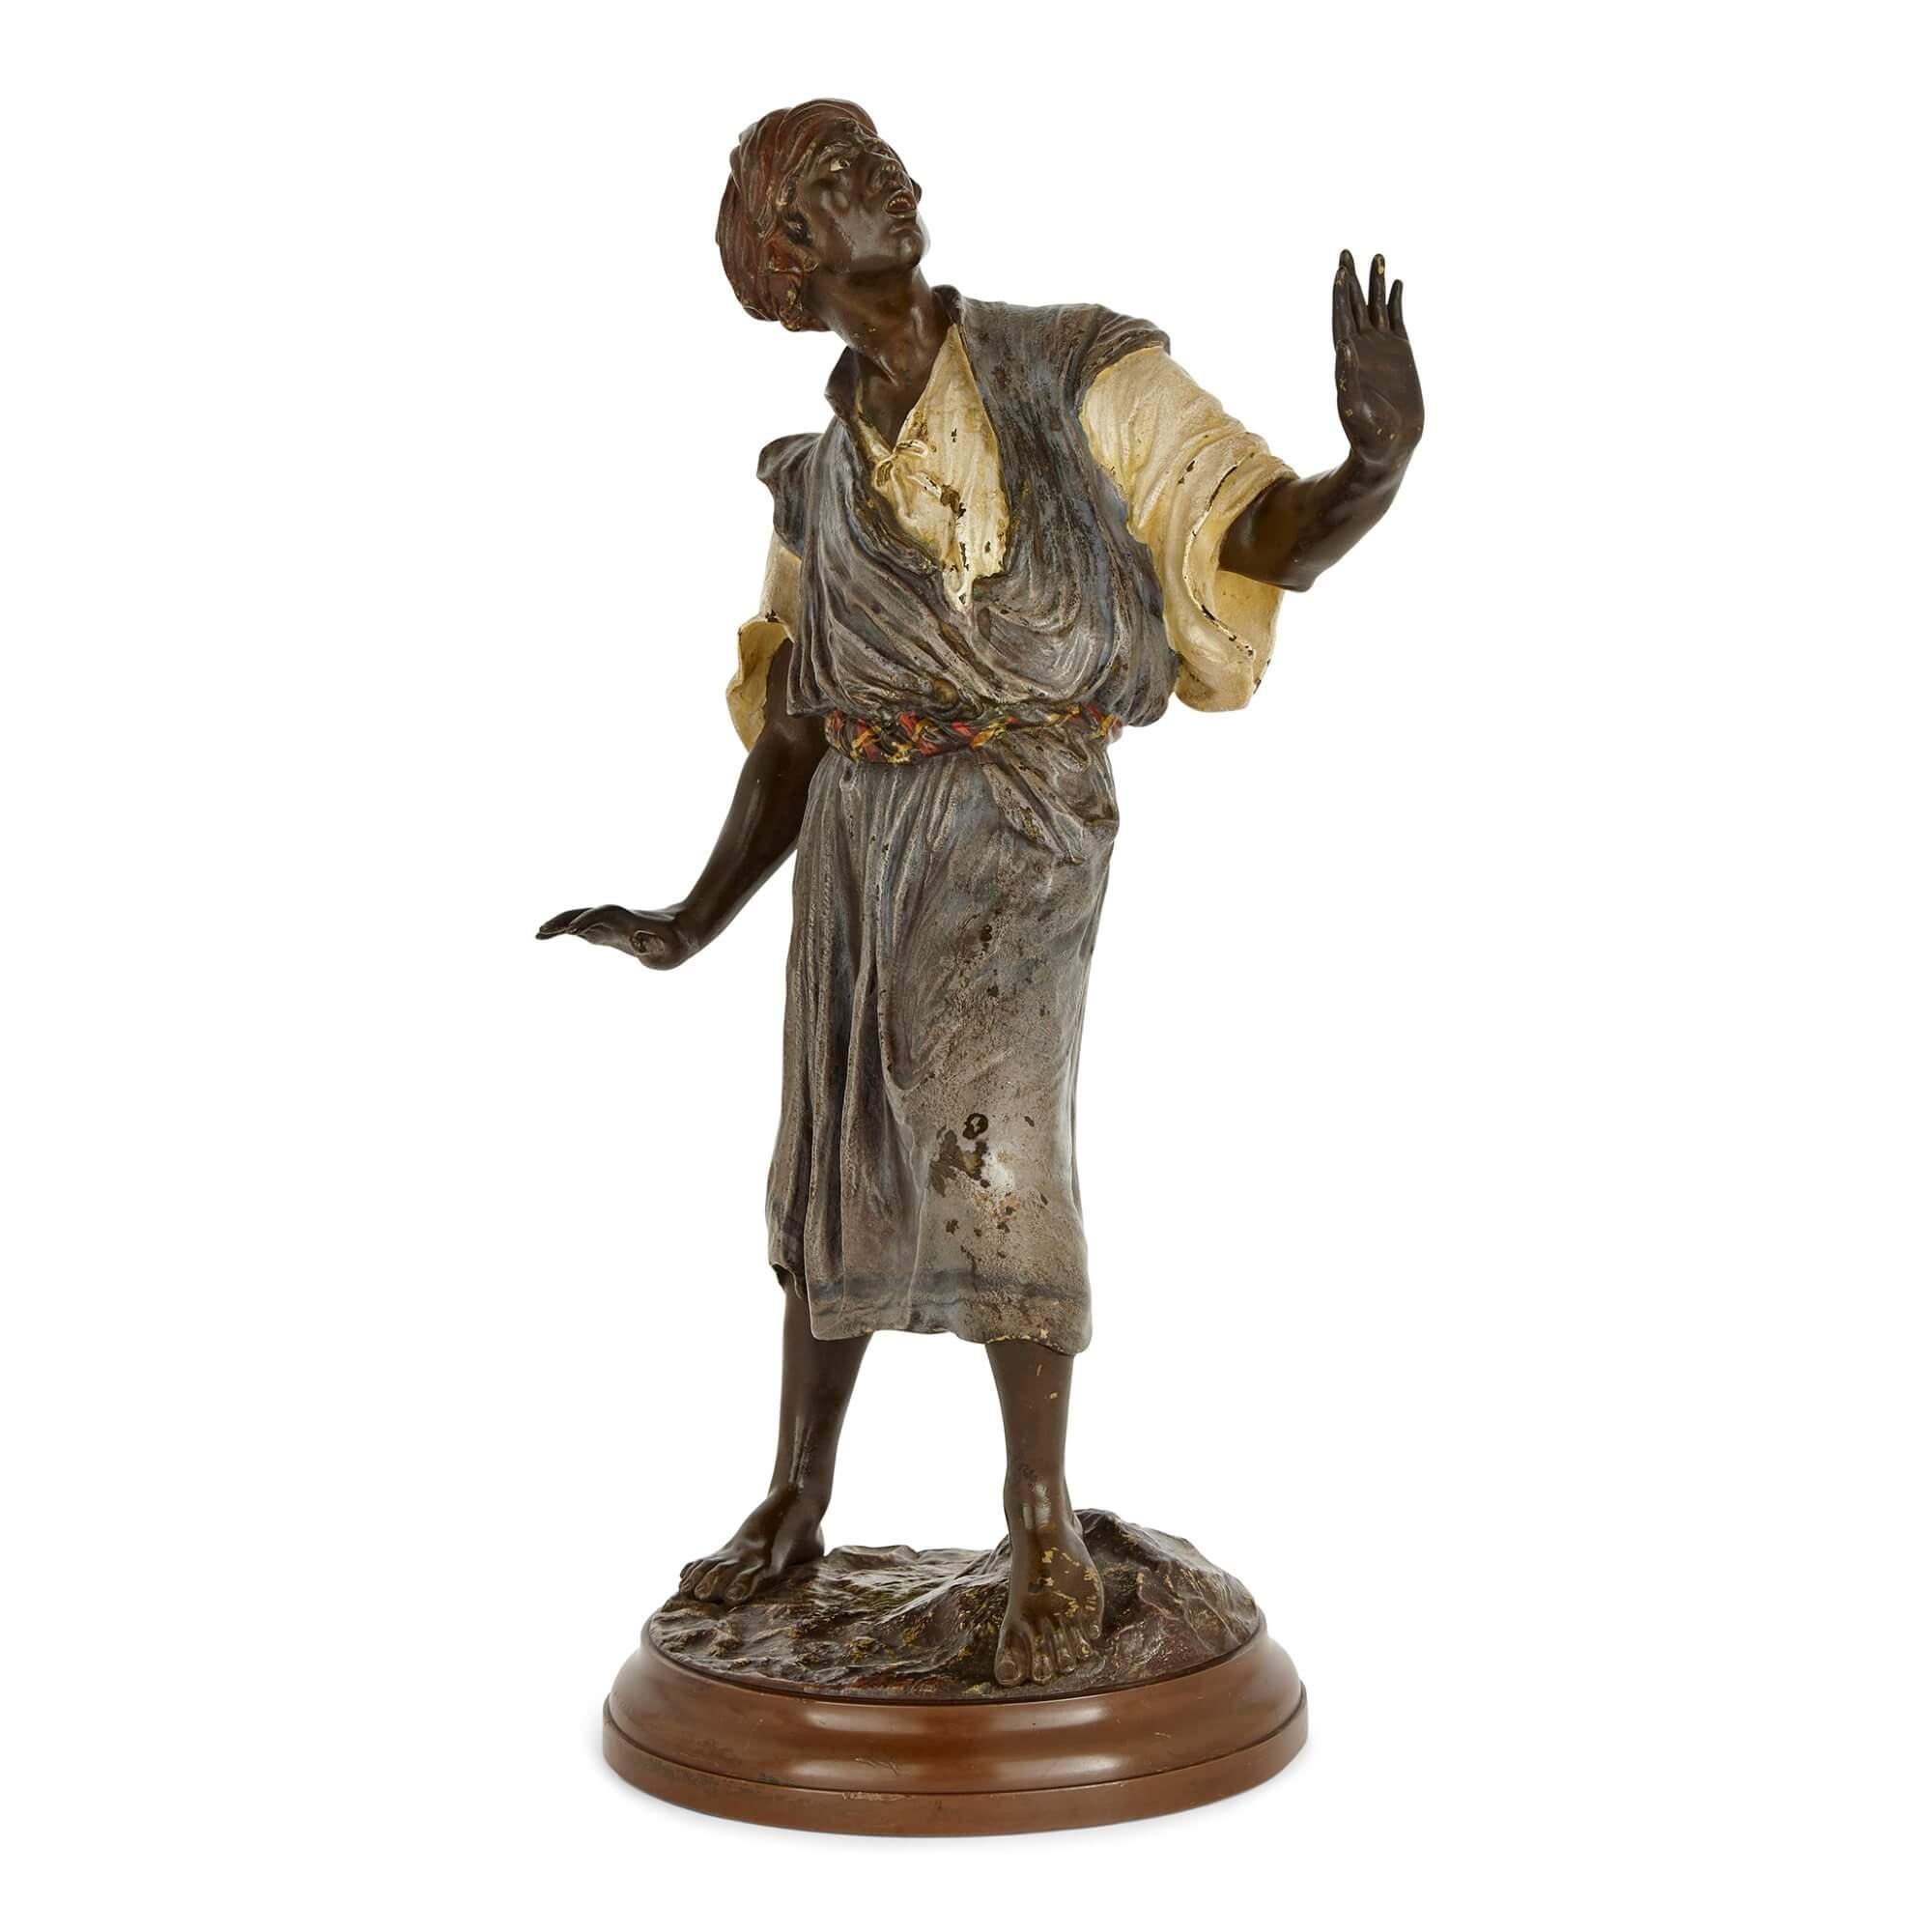 Large antique Austrian cold-painted bronze figurative sculpture by Bergman 
Austrian, c. 1910
Height 33cm, width 19cm, depth 14cm

Depicting an unusual composition, this Viennese cold-painted bronze was crafted by Franz Xaver Bergman (1861-1936). He